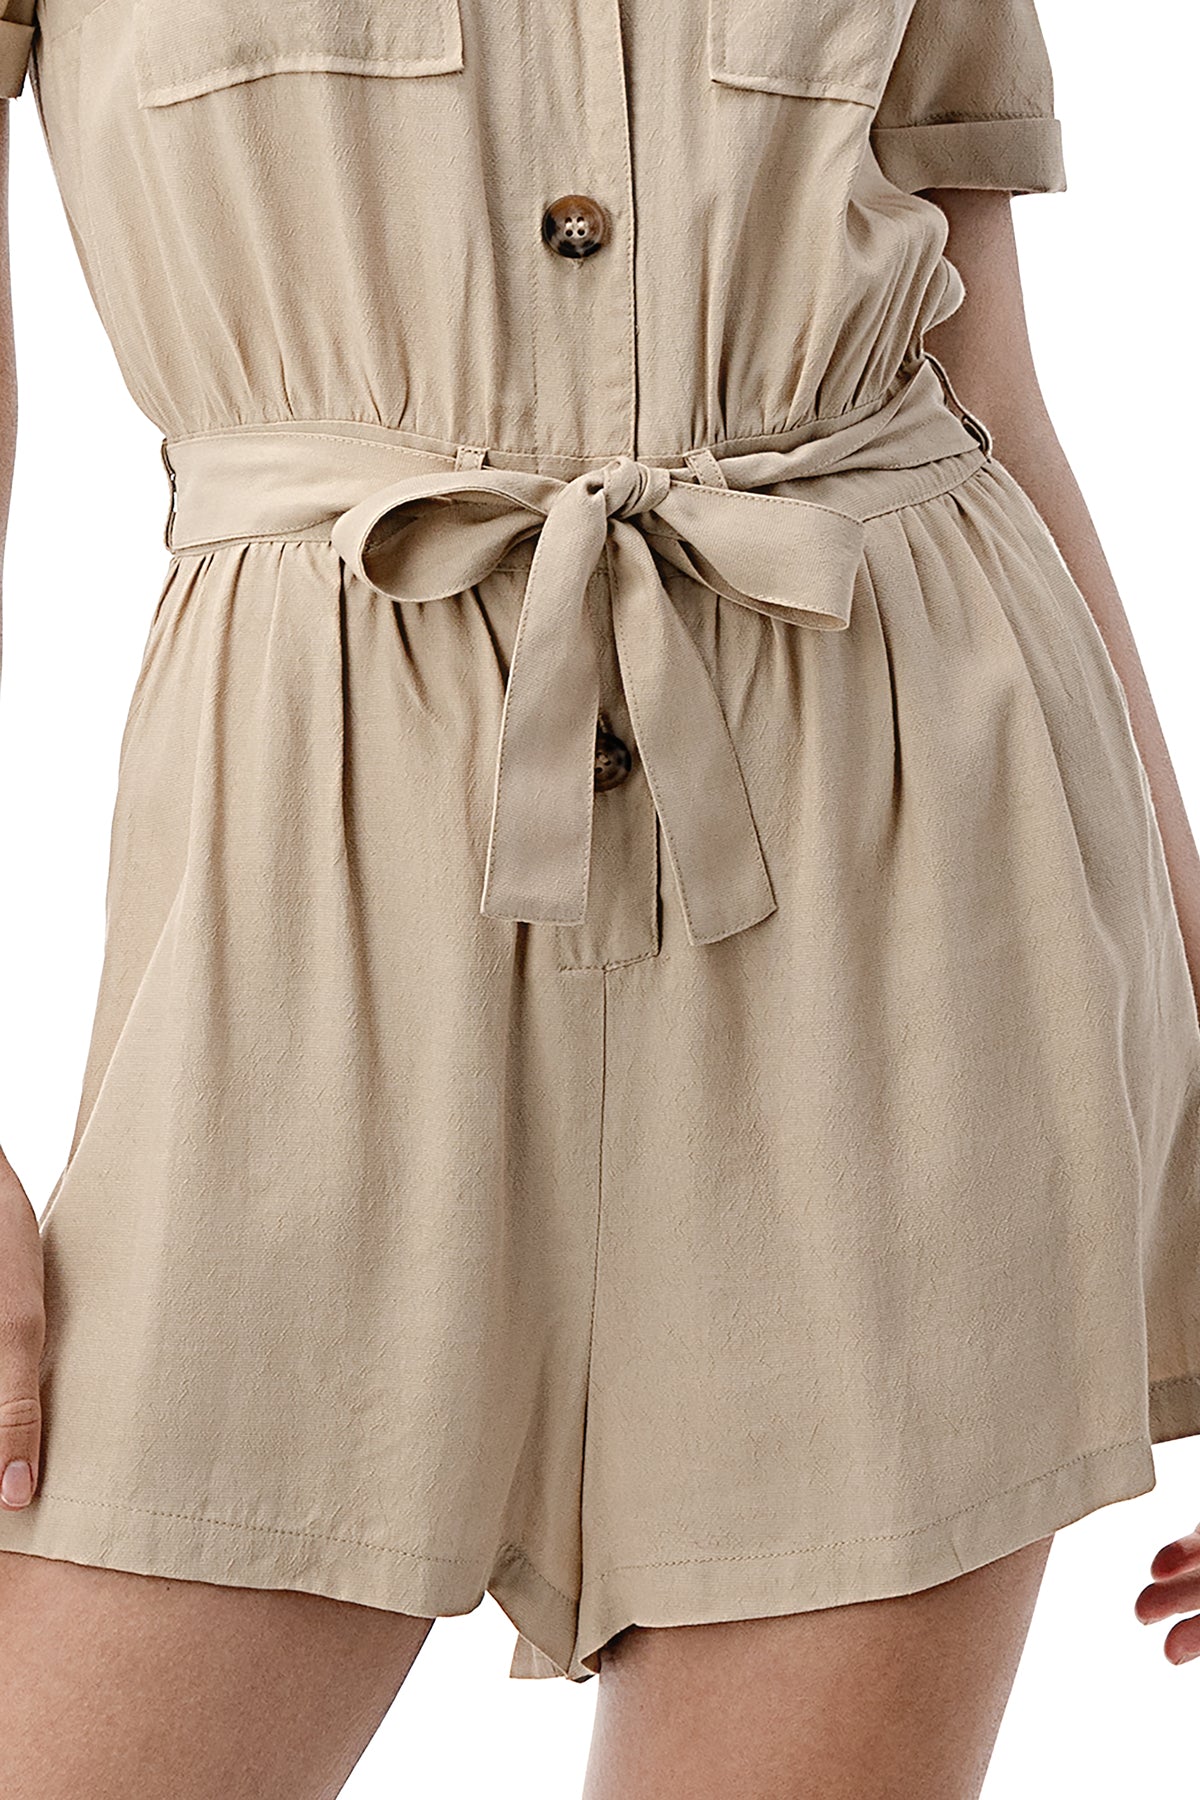 EDGY Land Girl's and Women's Casual Short Sleeve & Sleeveless Button Down Waist Tie Cargo Romper